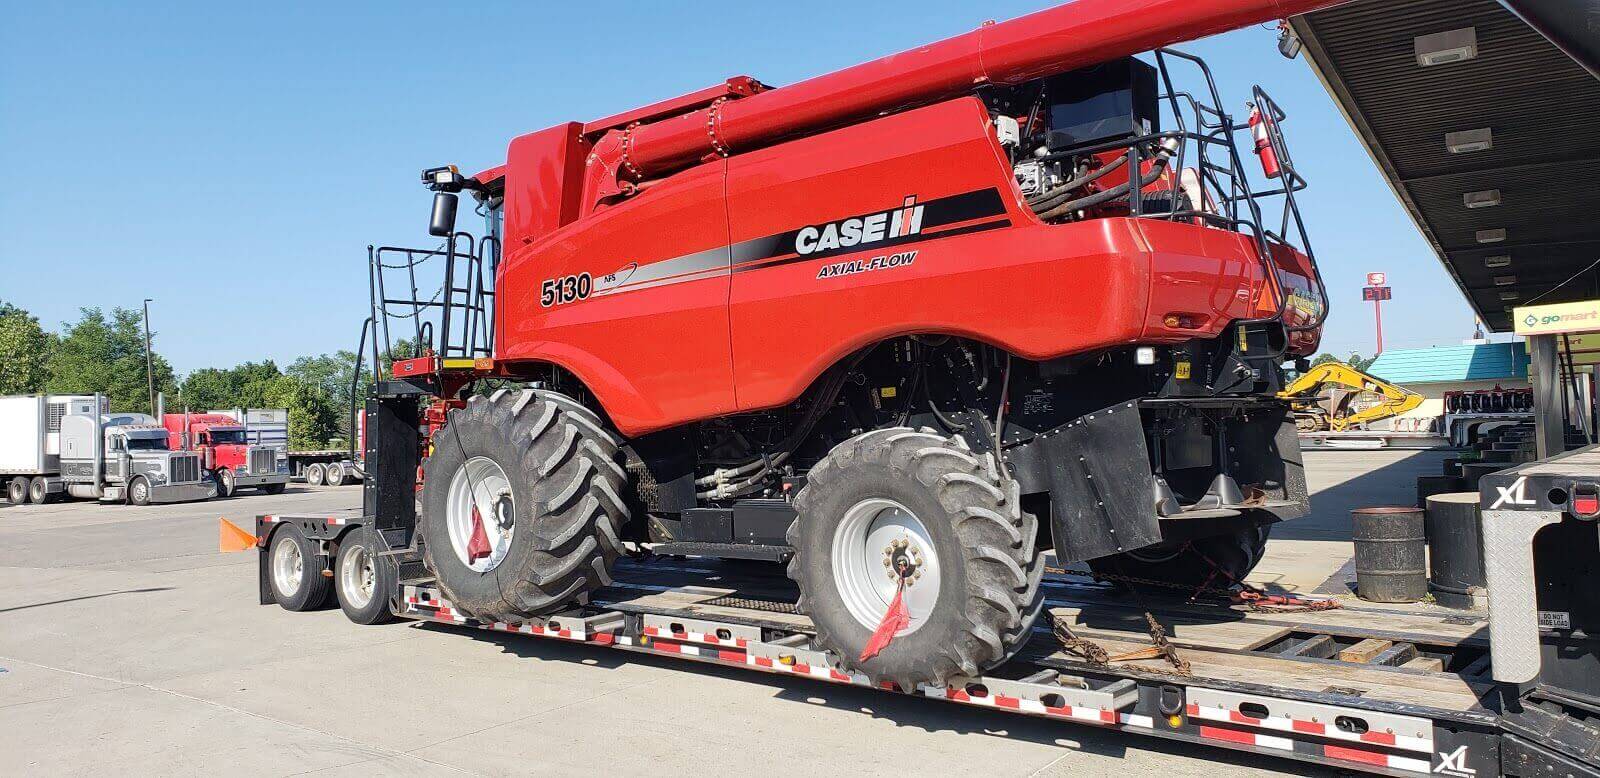 2013 Case IH 5130 being transported